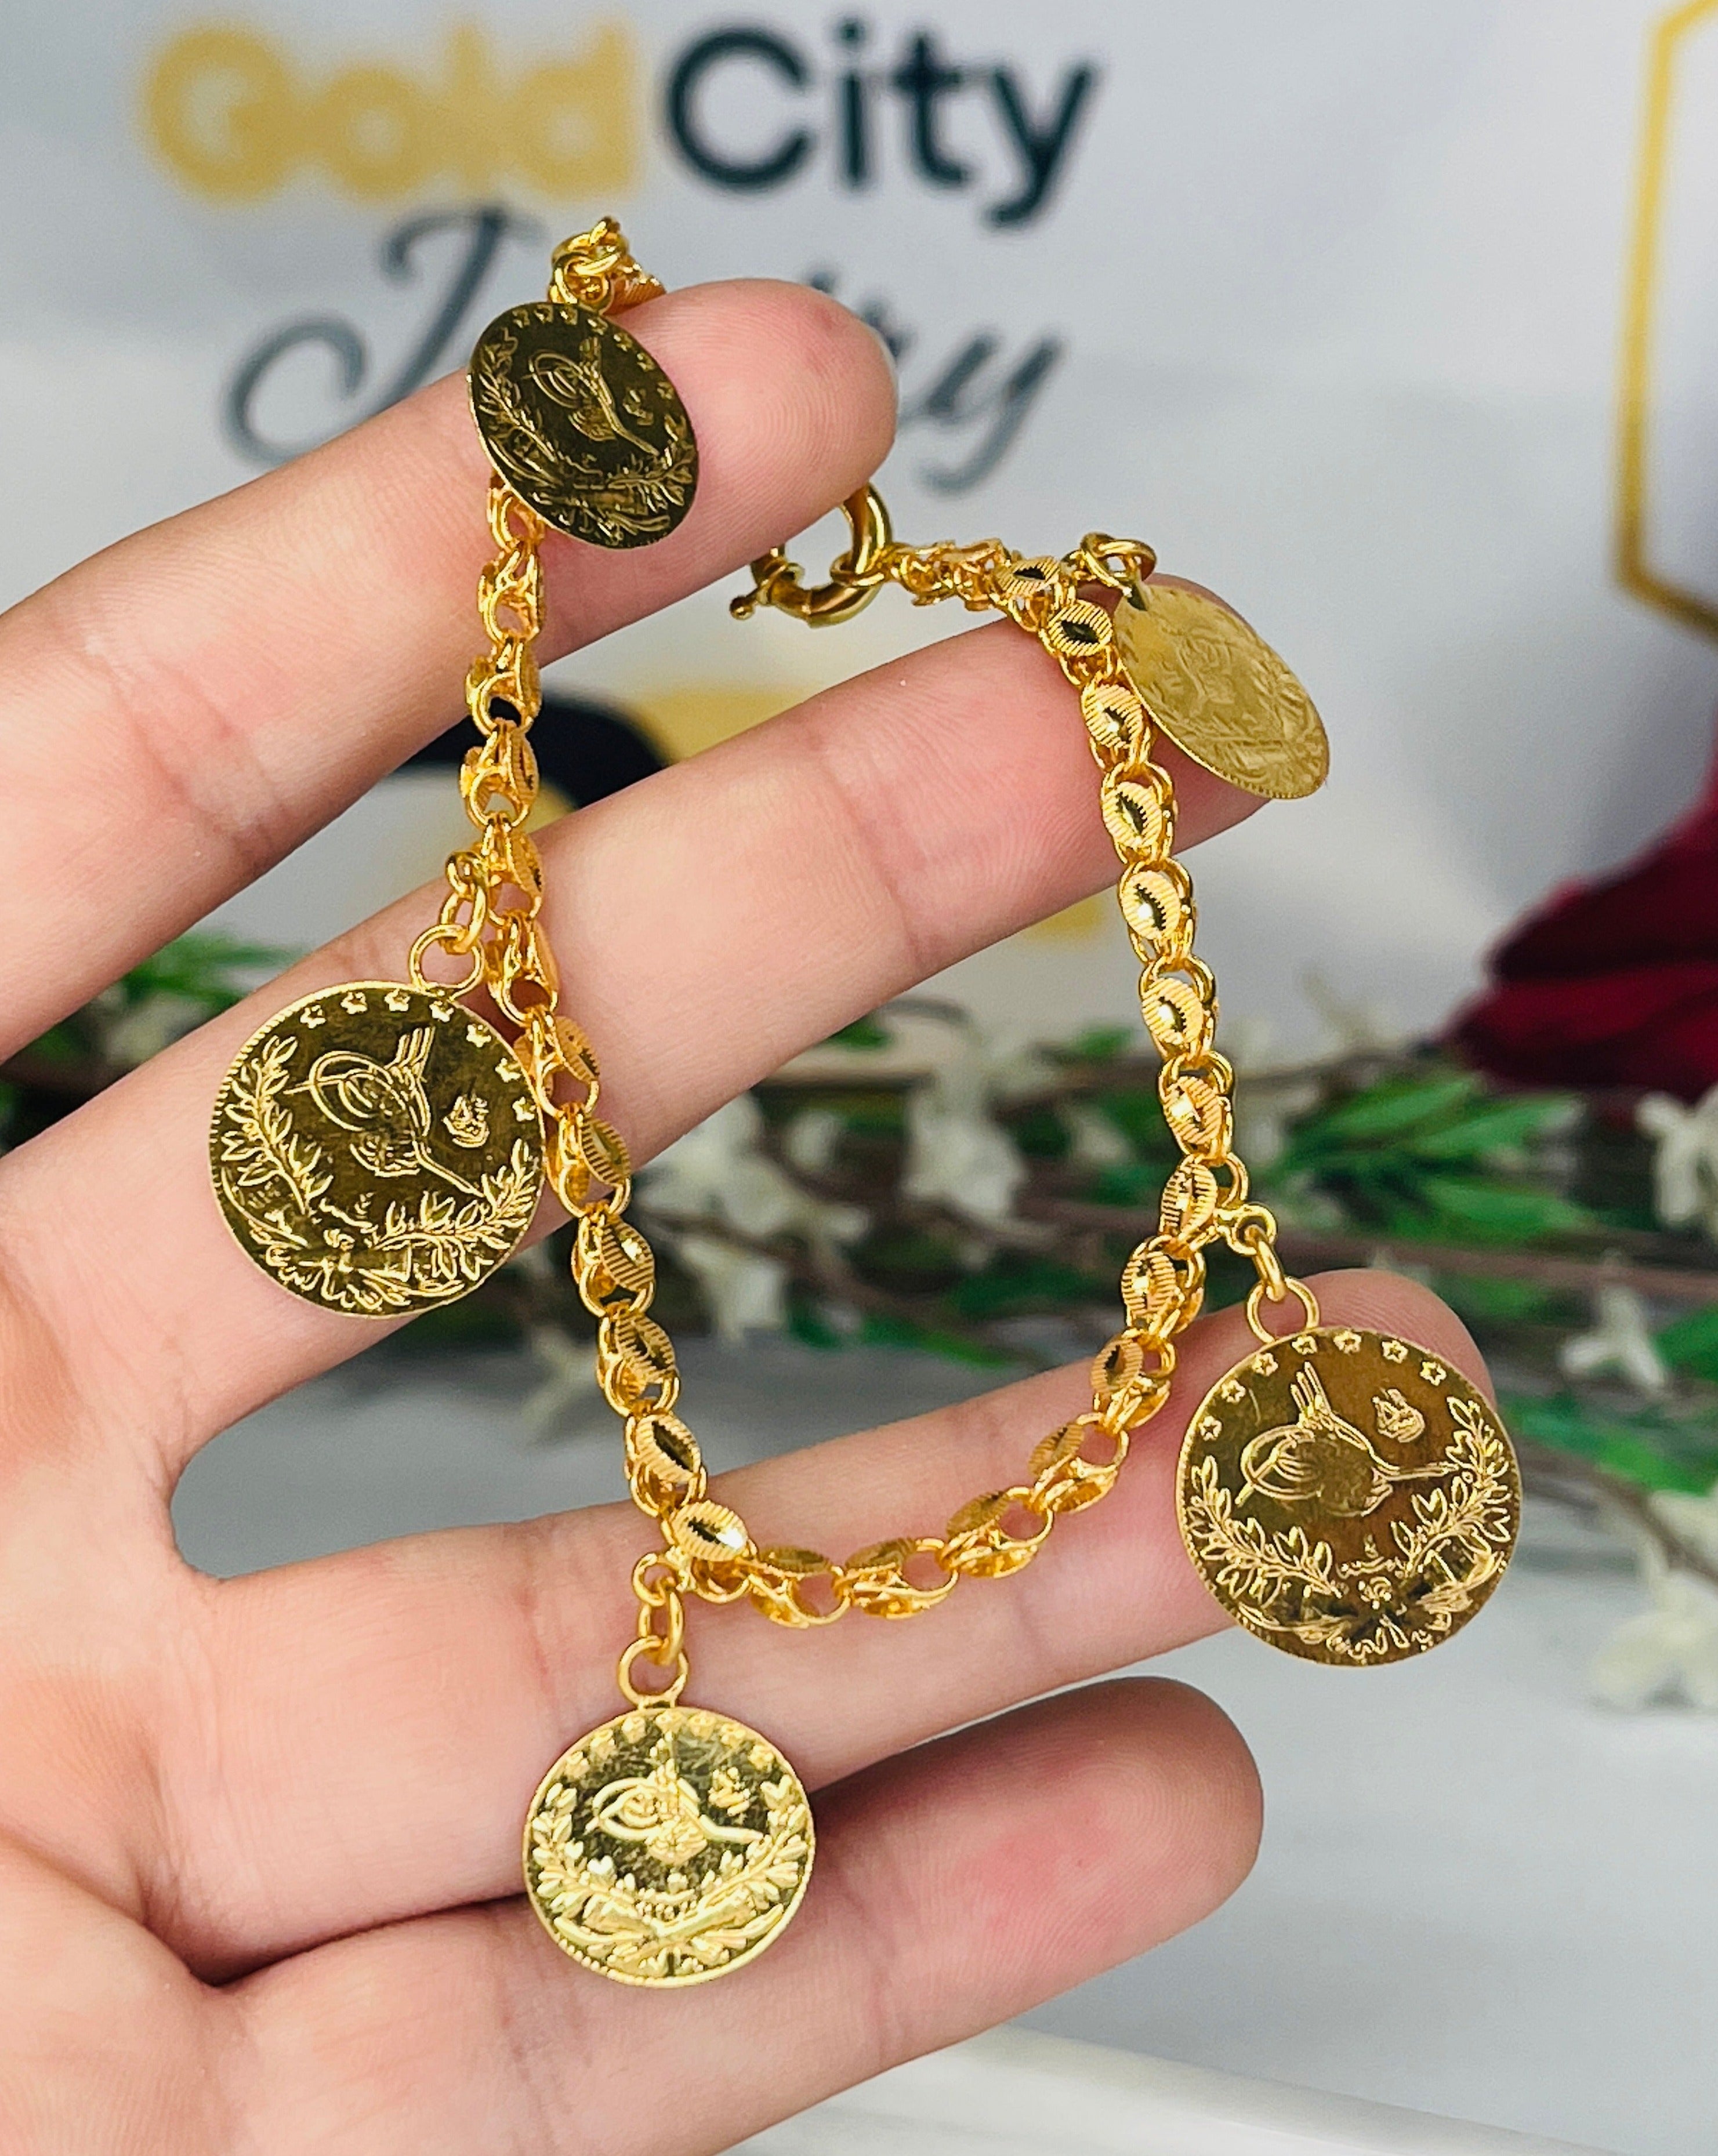 14k + 18k Yellow Gold Archangel Michael Coin Round Link Toggle Bracelet -  A&V Pawn